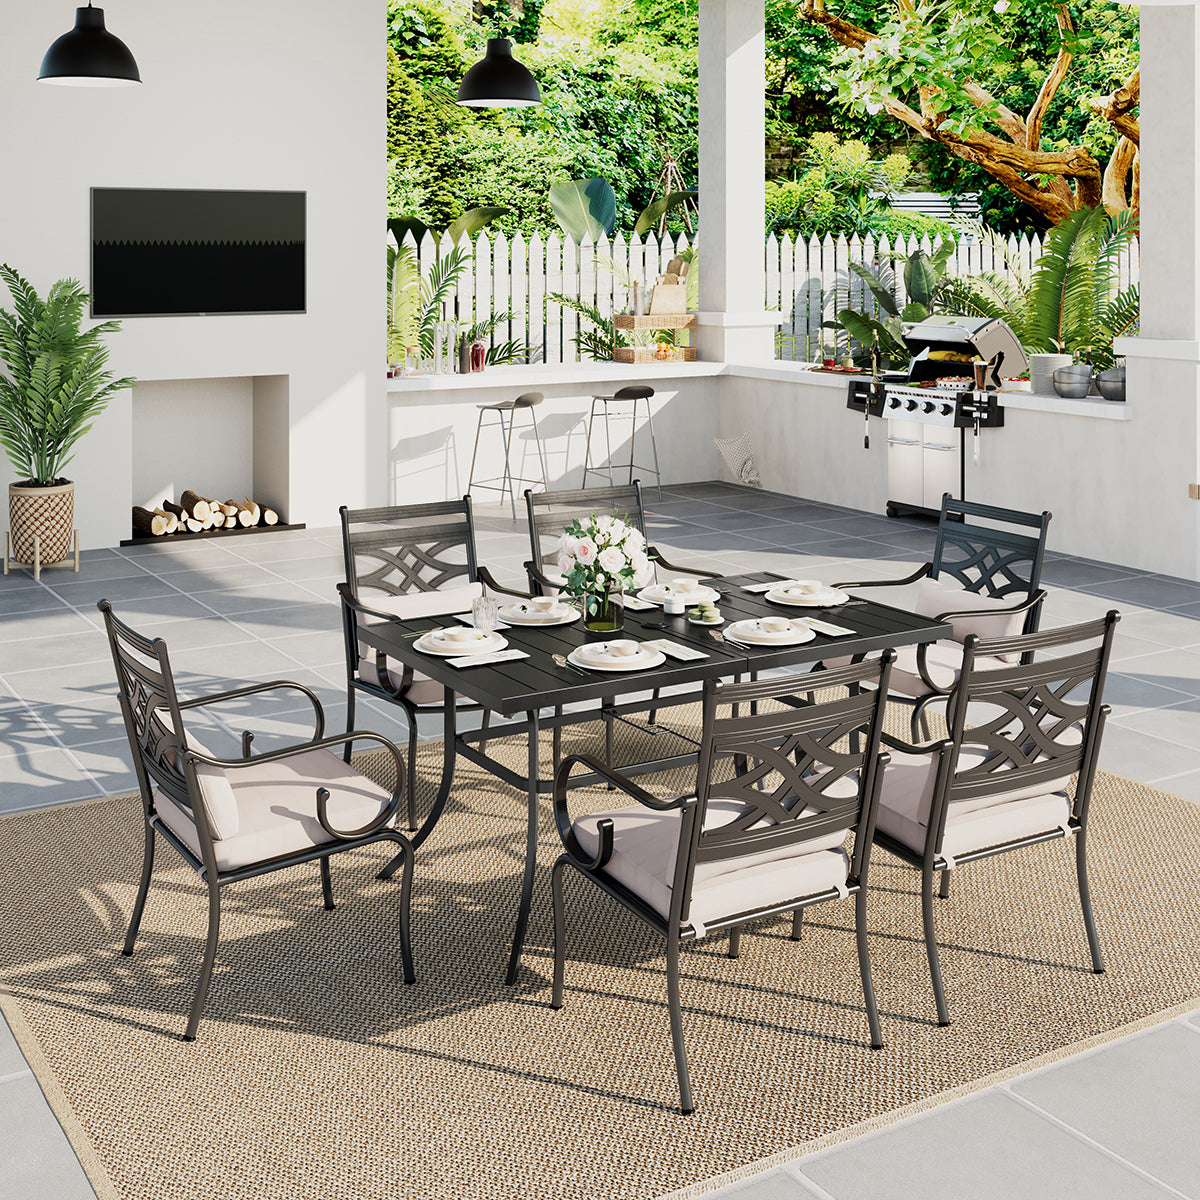 MFSTUDIO 7-Piece Outdoor Dining Set Steel Panel Table & Elegant Cast Iron Pattern Dining Chairs